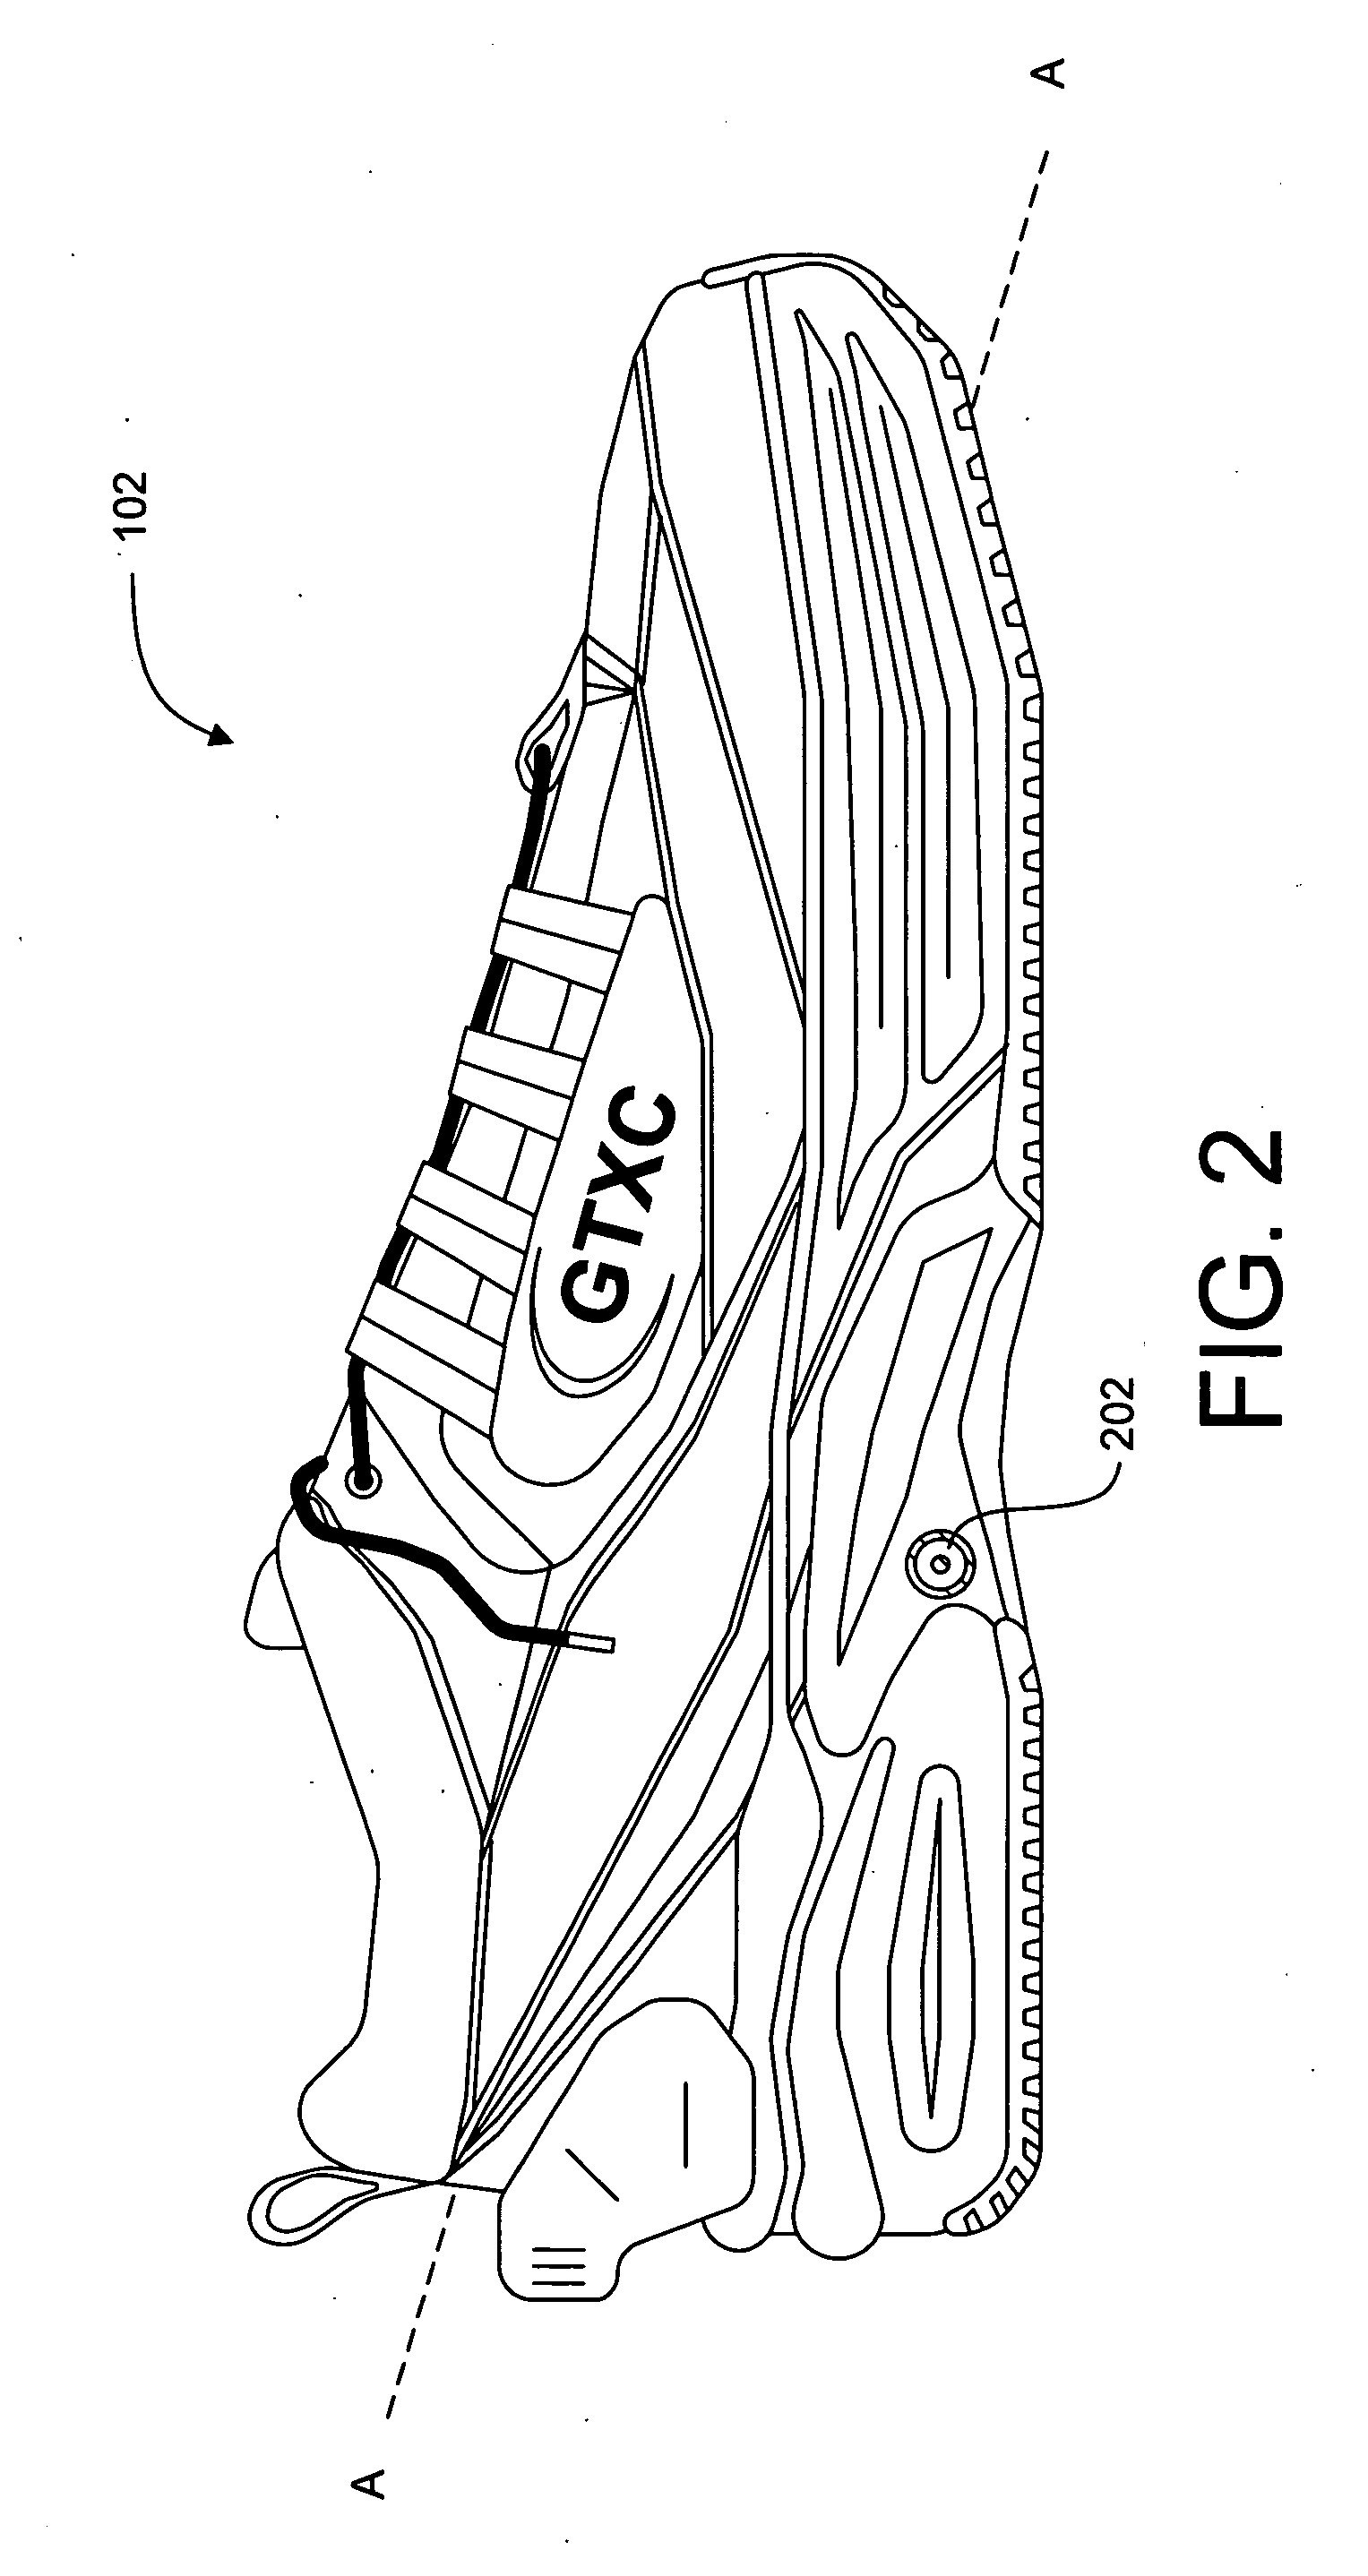 Footwear with embedded tracking device and method of manufacture